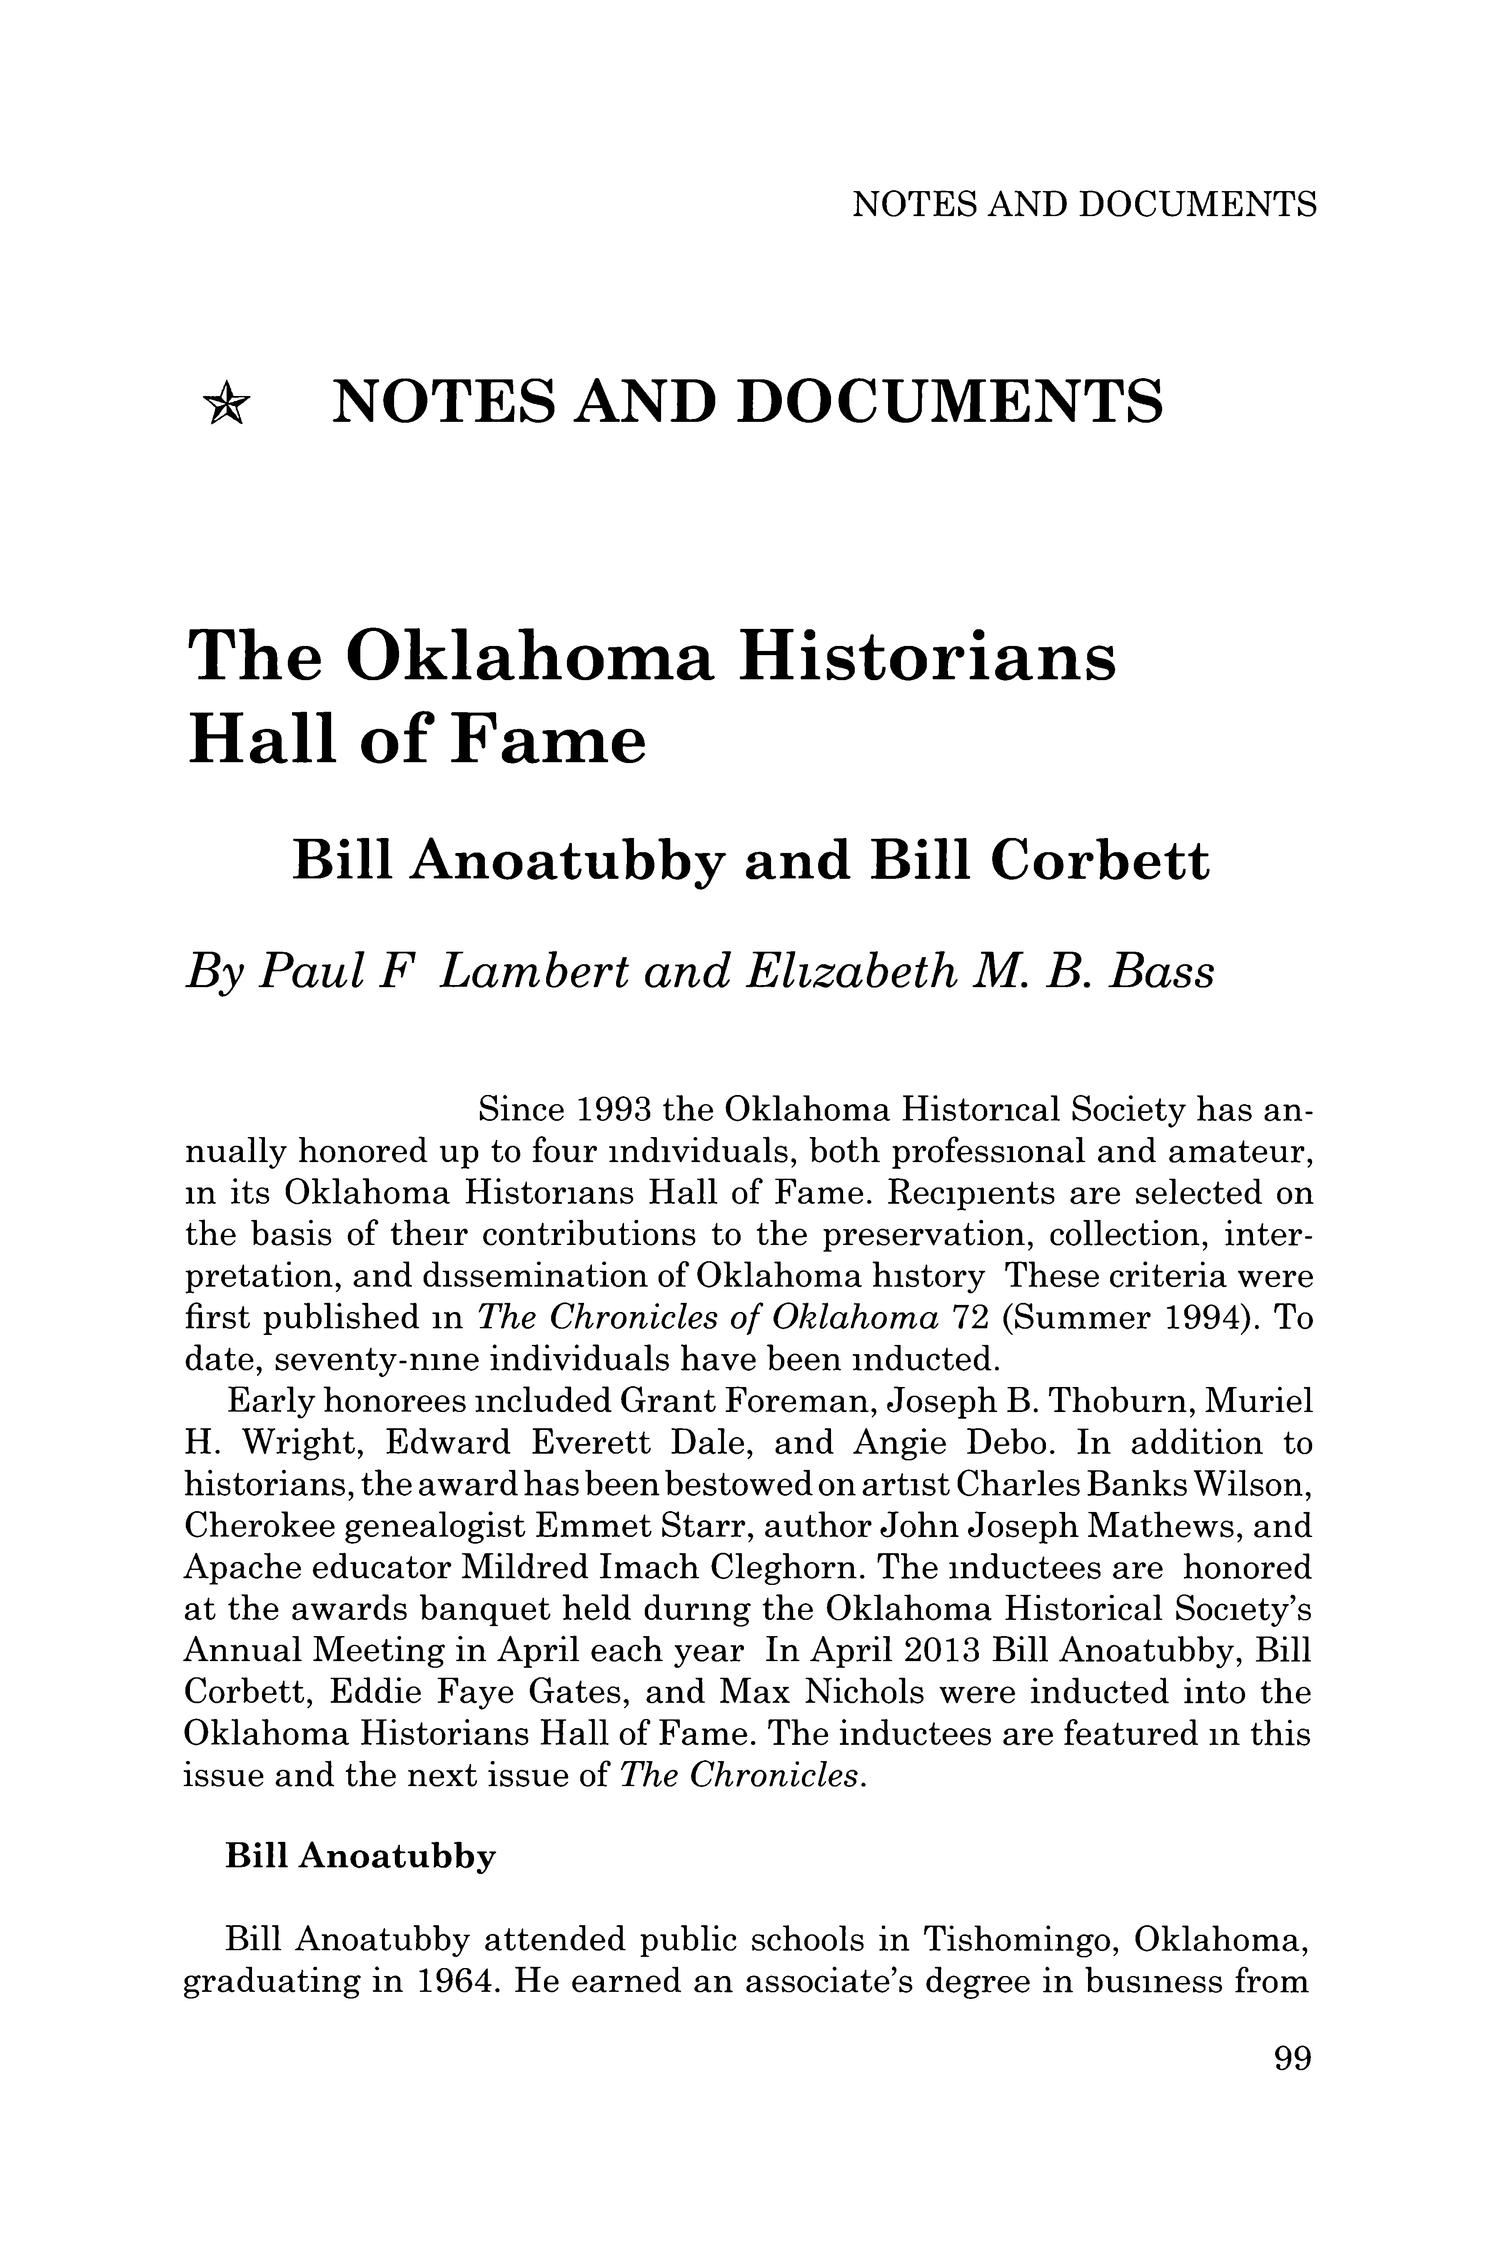 Chronicles of Oklahoma, Volume 91, Number 1, Spring 2013
                                                
                                                    99
                                                